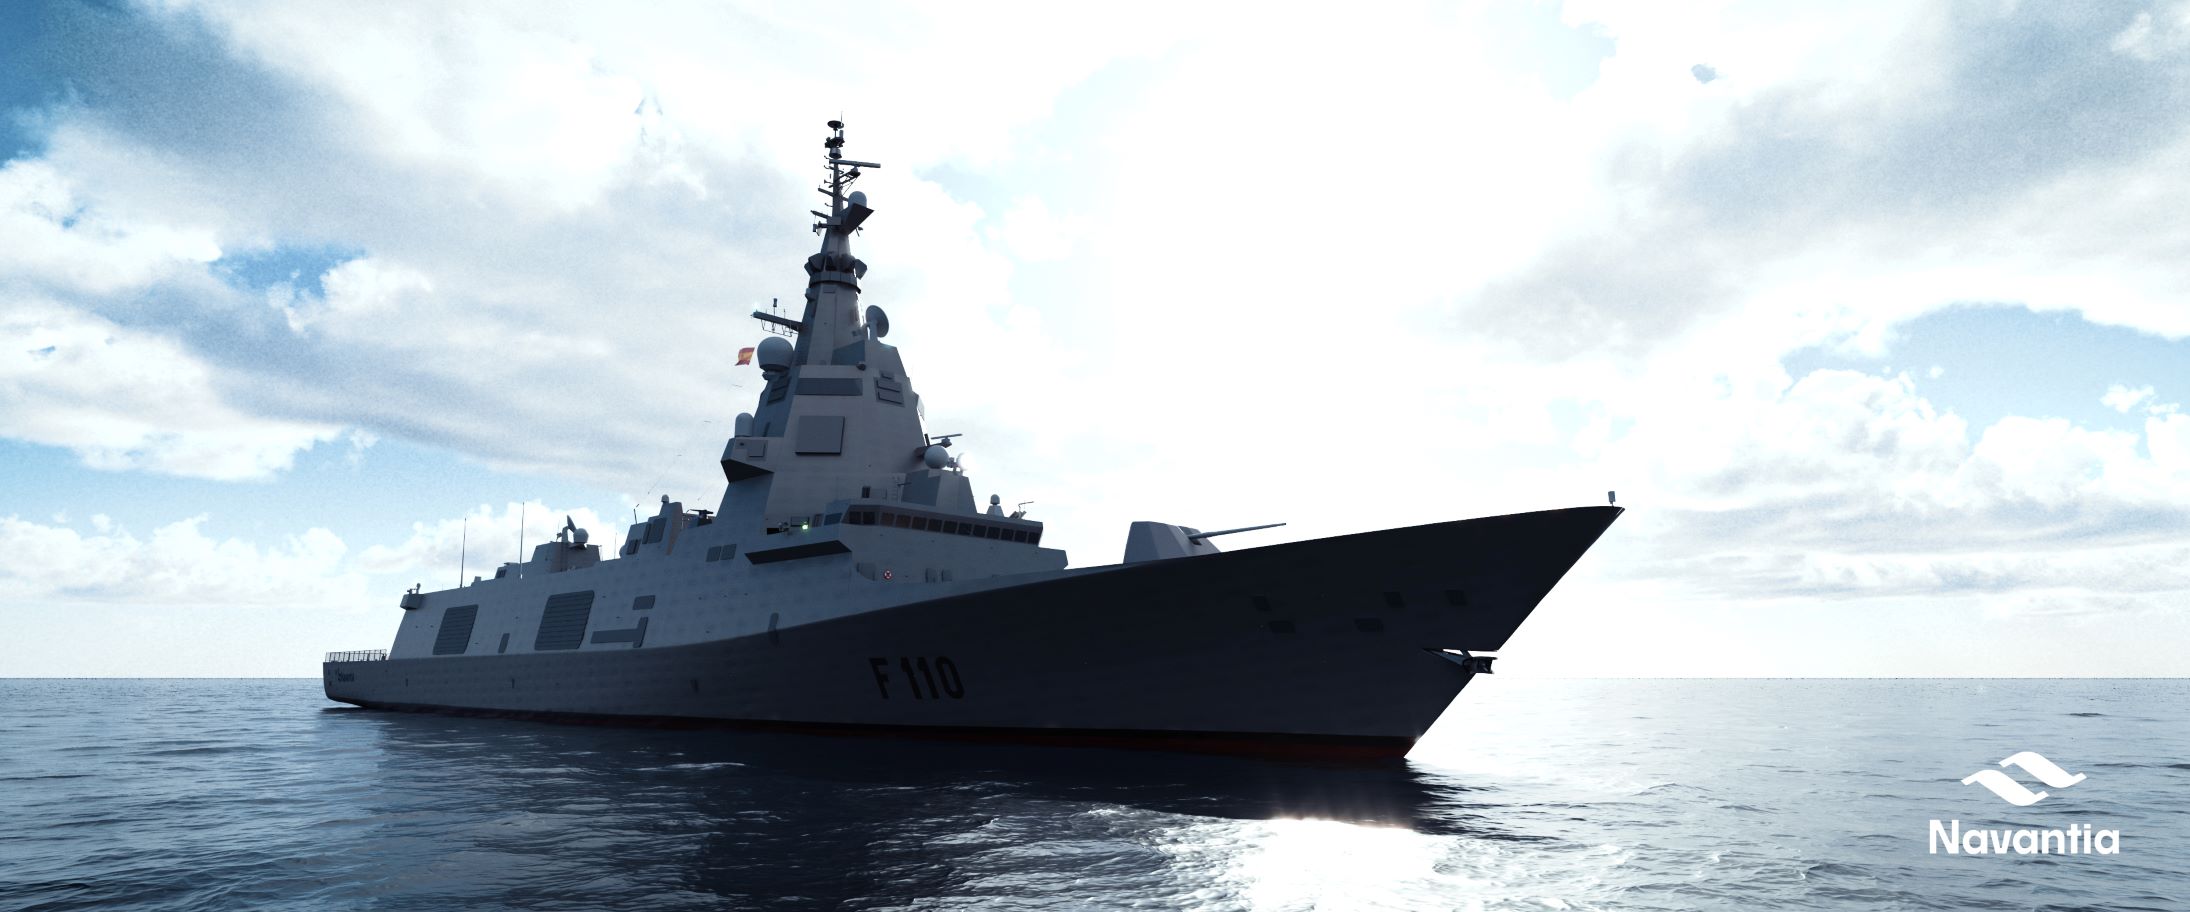 Damen Marine Components wins rudder and steering systems order for five Spanish navy vessels built at Navantia